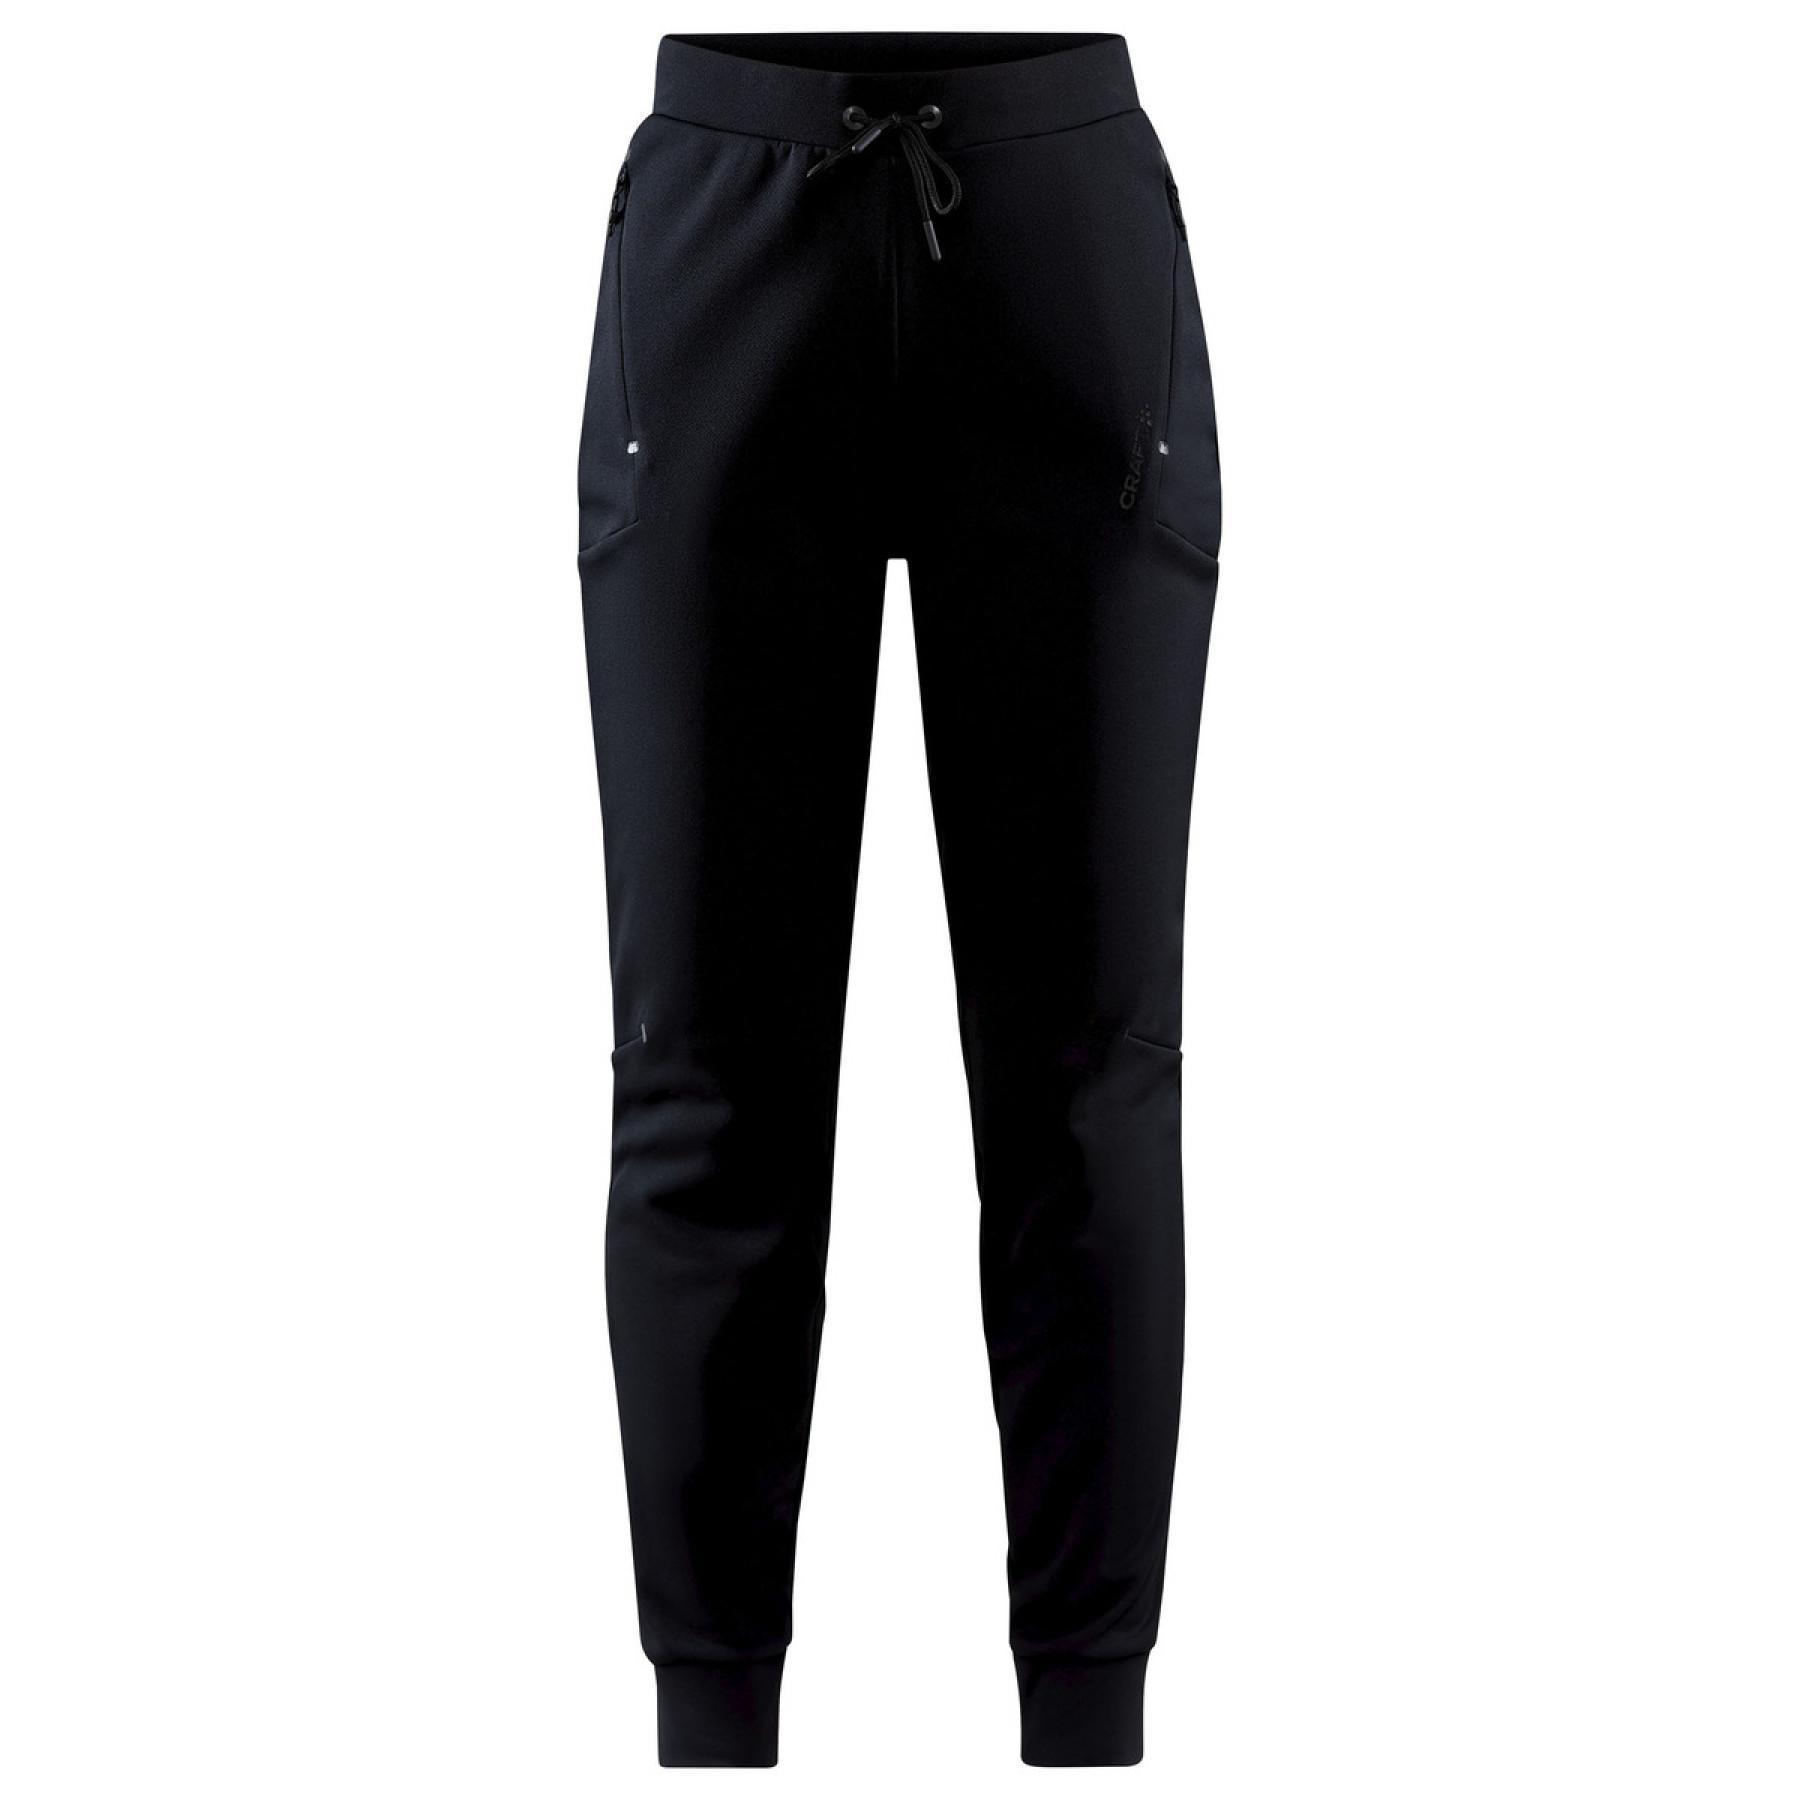 Women's trousers Craft adv unify